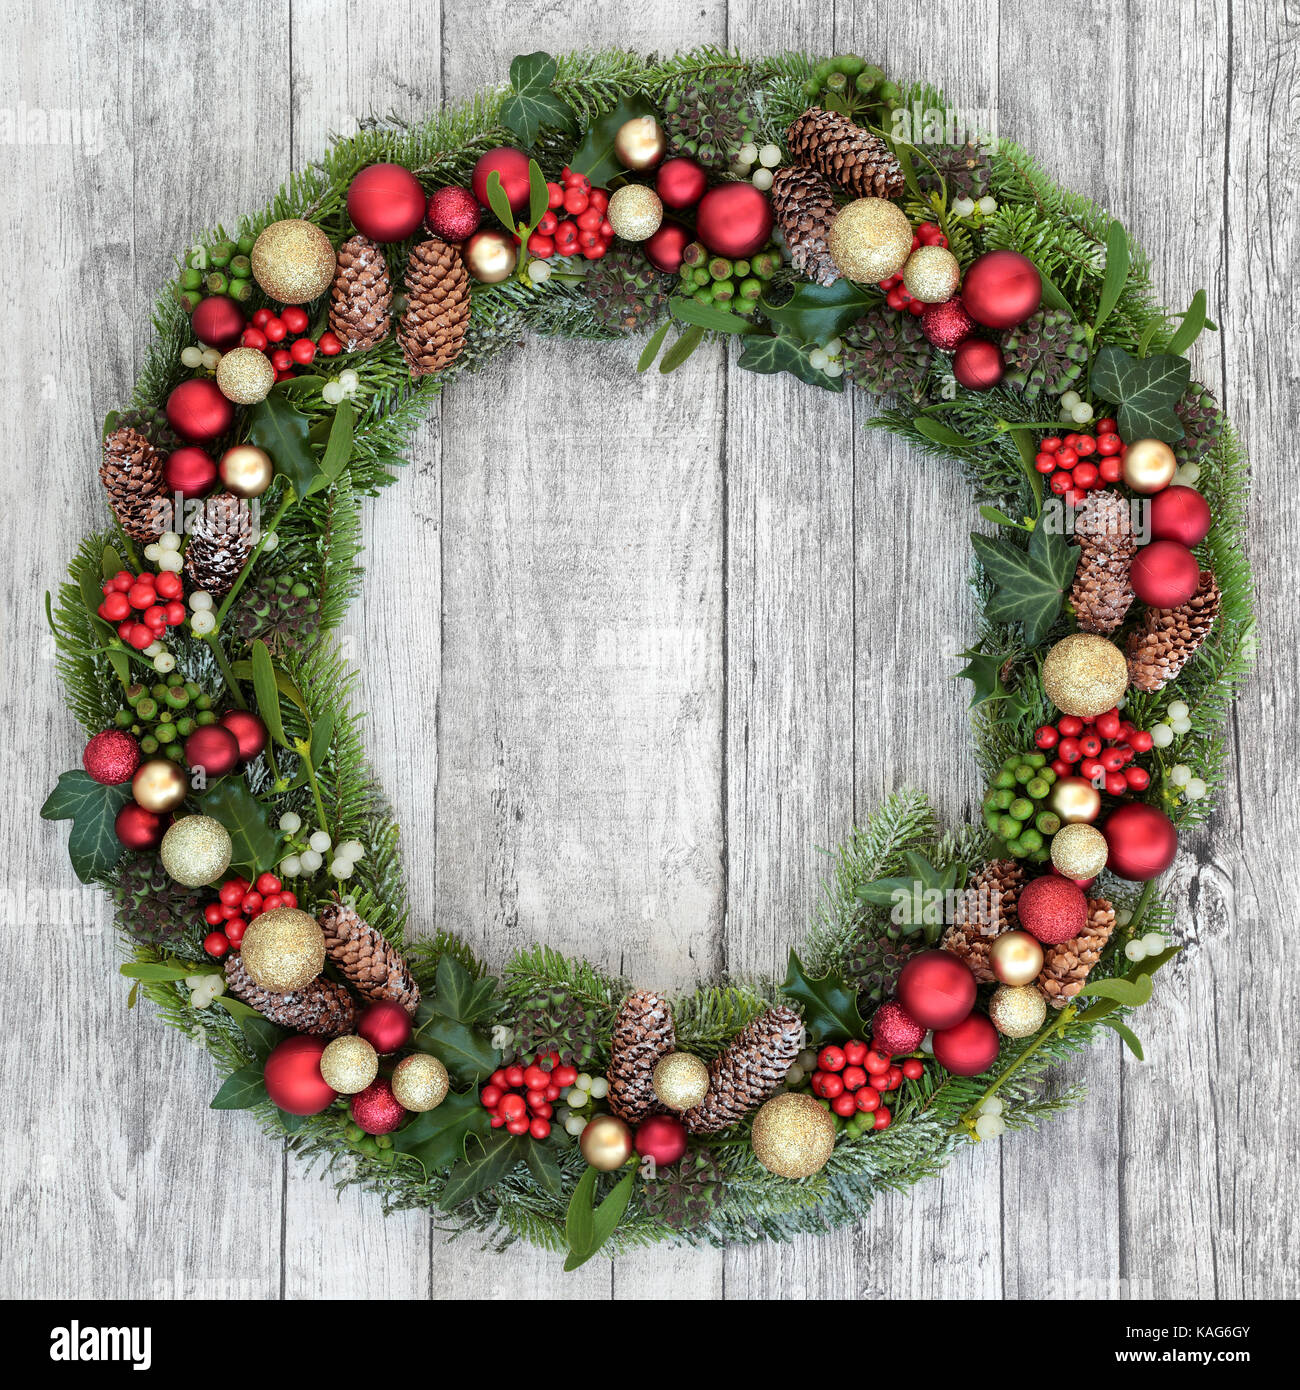 Christmas wreath decoration with baubles, holly, mistletoe, snow covered fir, blue spruce, ivy and pine cones on rustic white wood background. Stock Photo